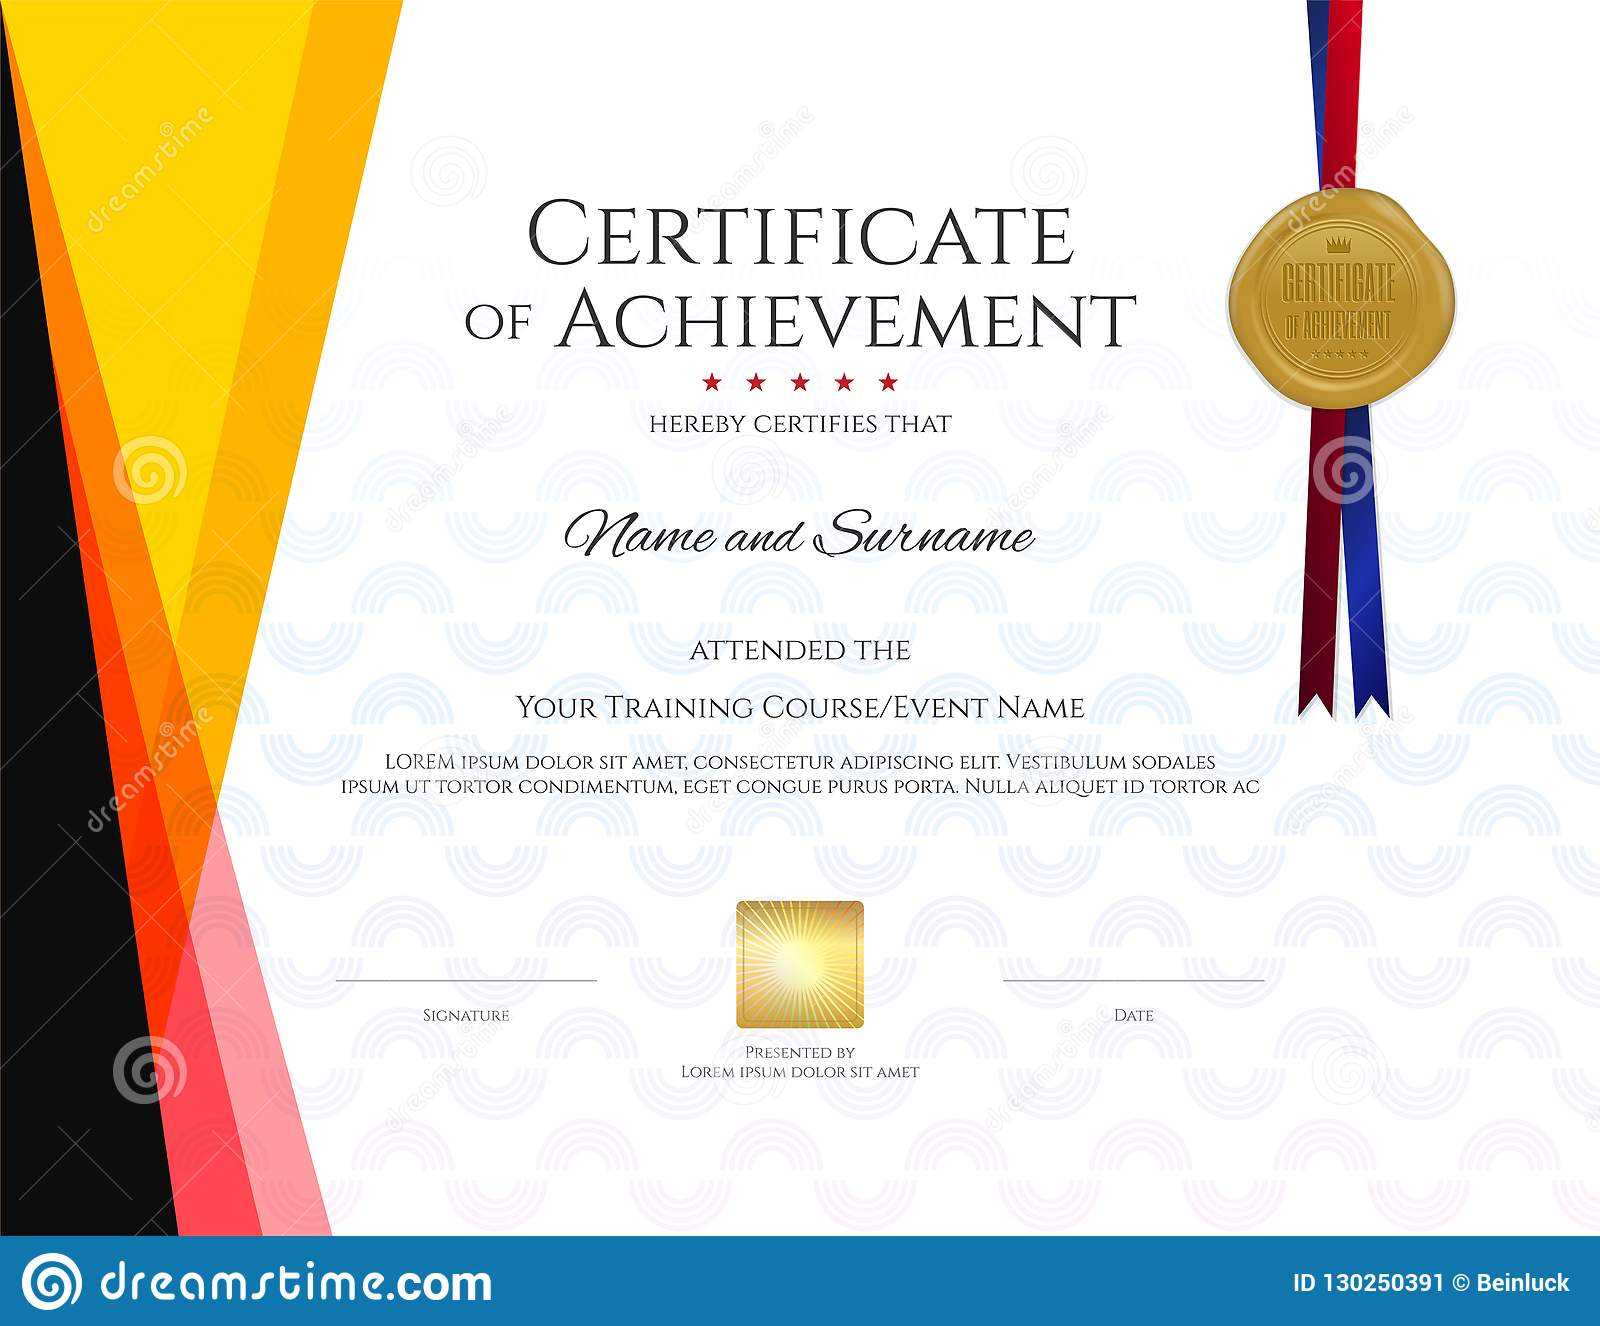 Modern Certificate Template With Elegant Border Frame Intended For Christian Certificate Template